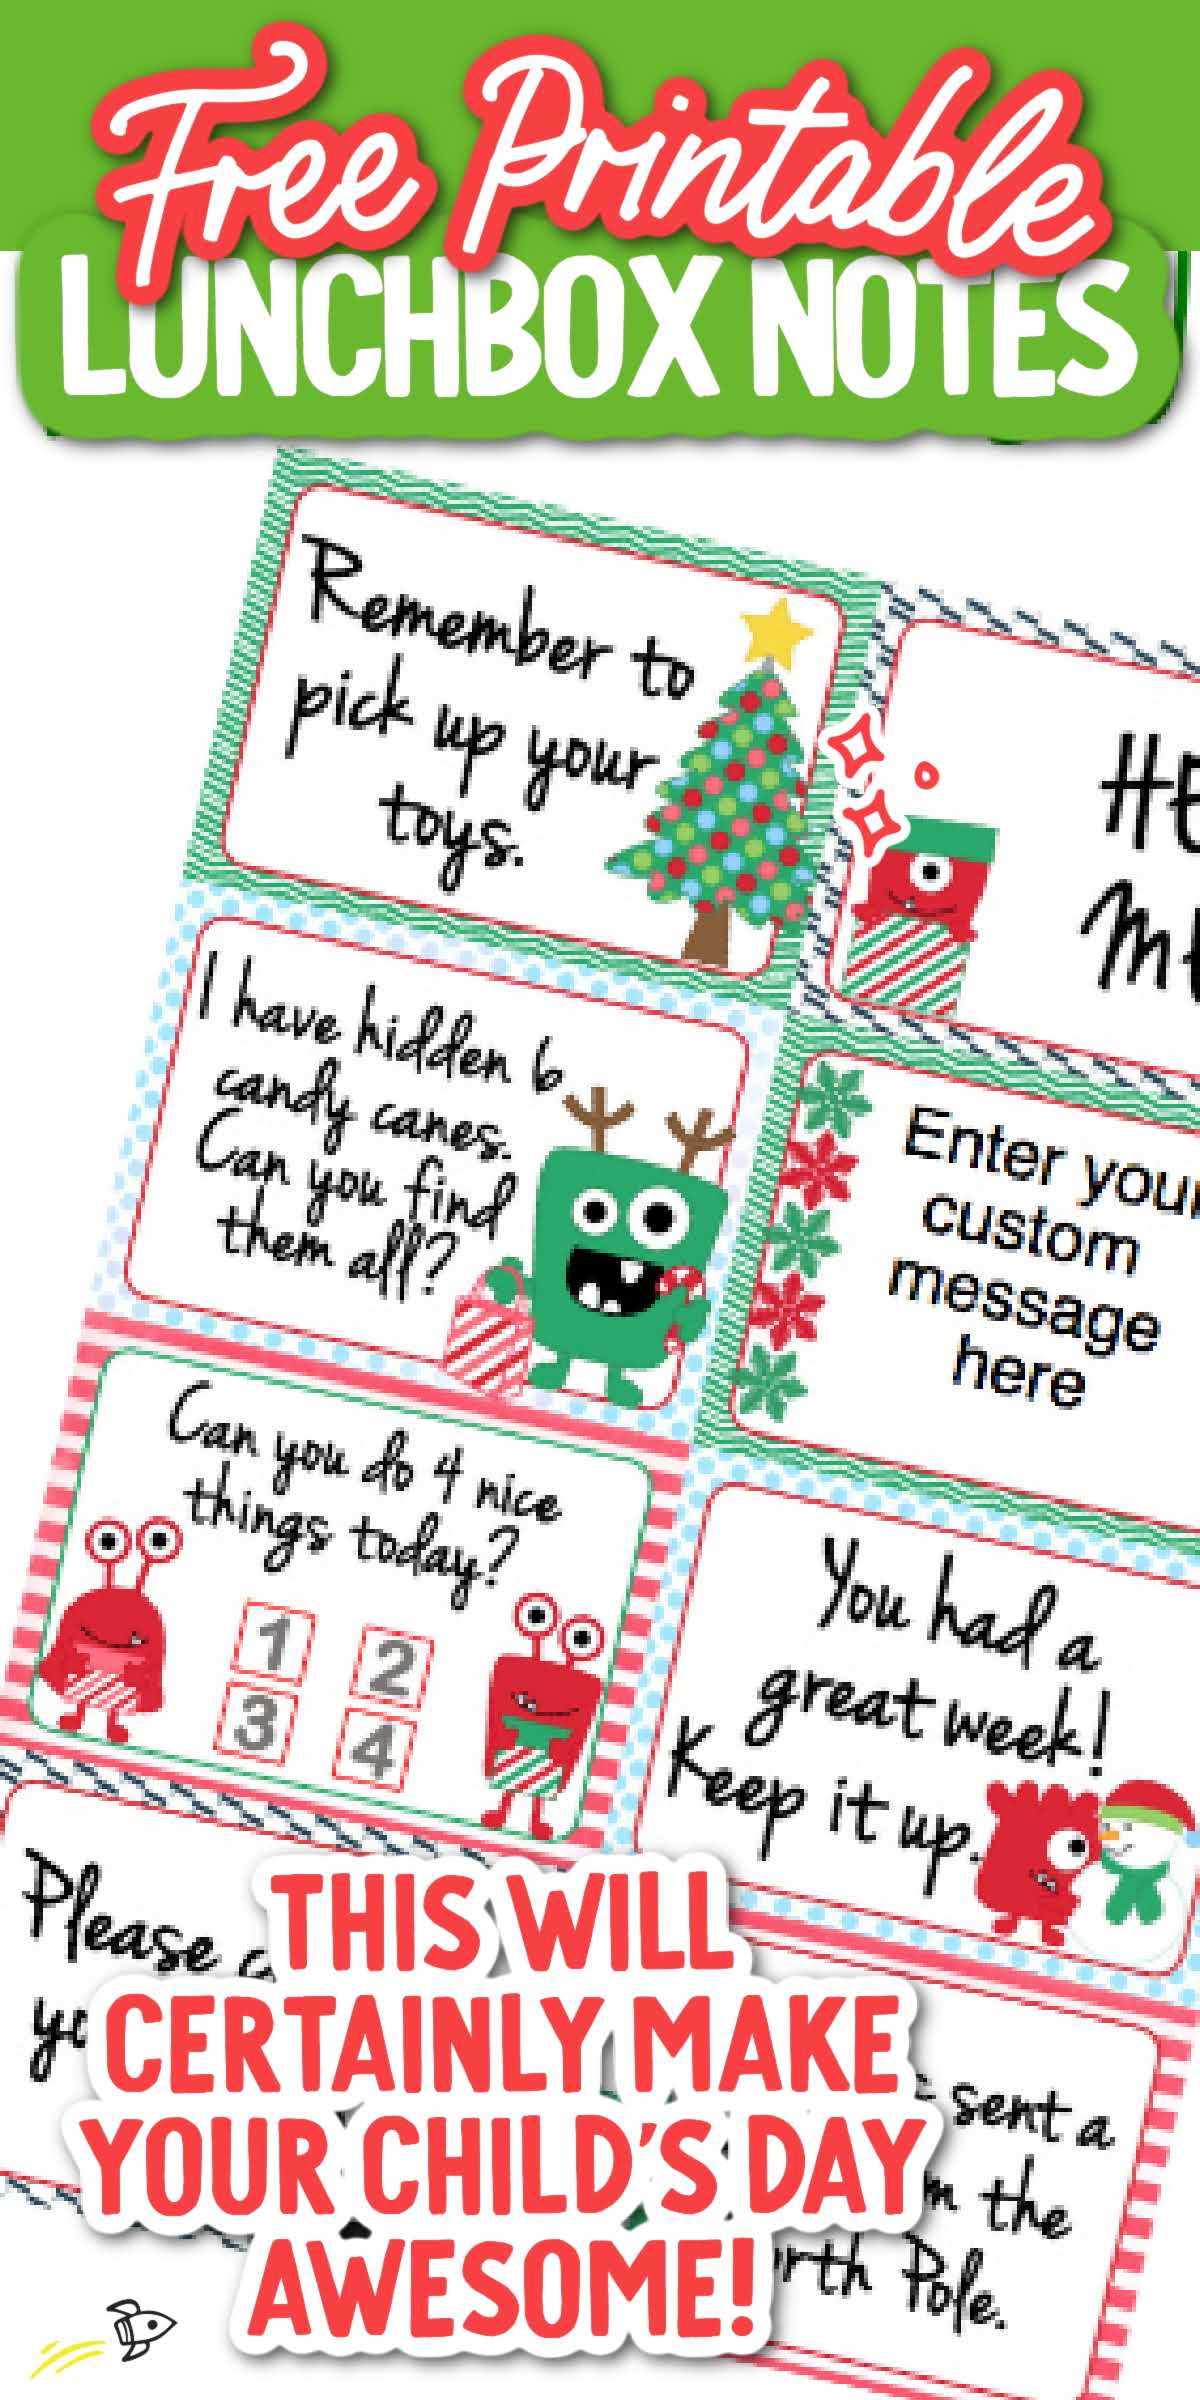 7 Free Printable Christmas Lunchbox Notes - Spaceships and Laser Beams